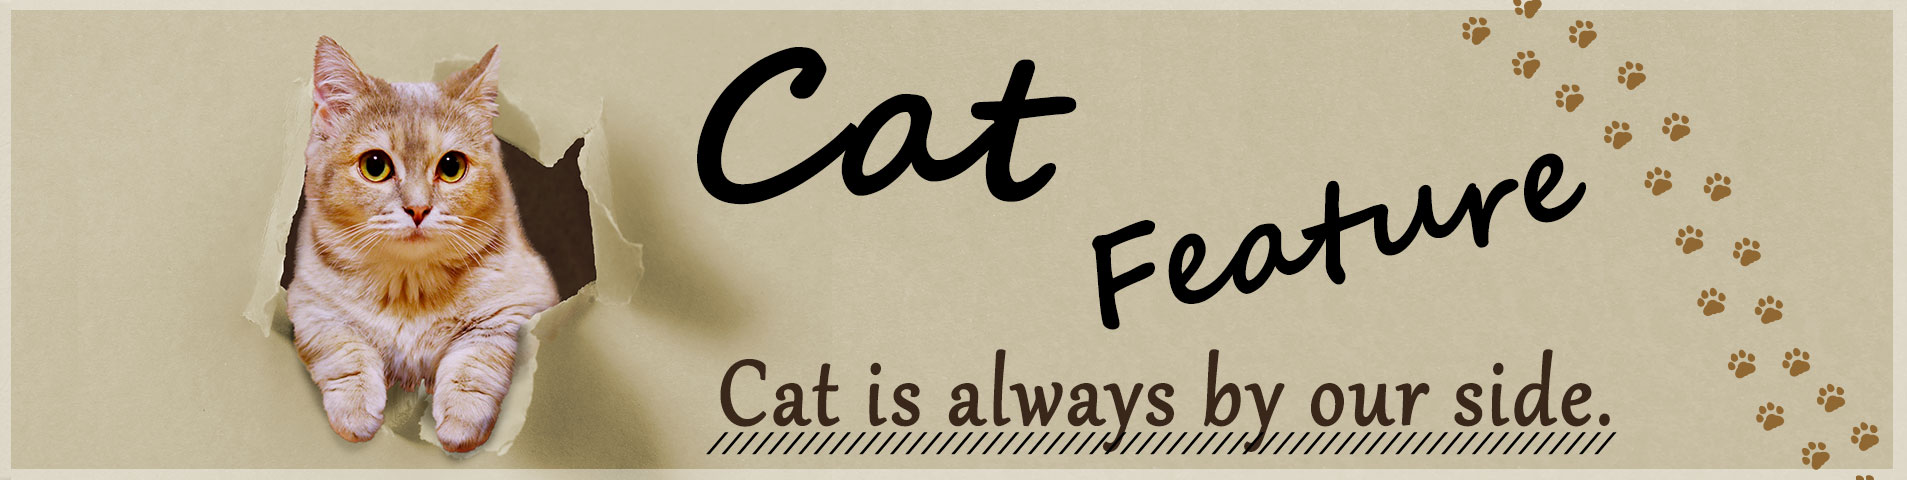 Cat Feature -Cat is always by our side.-